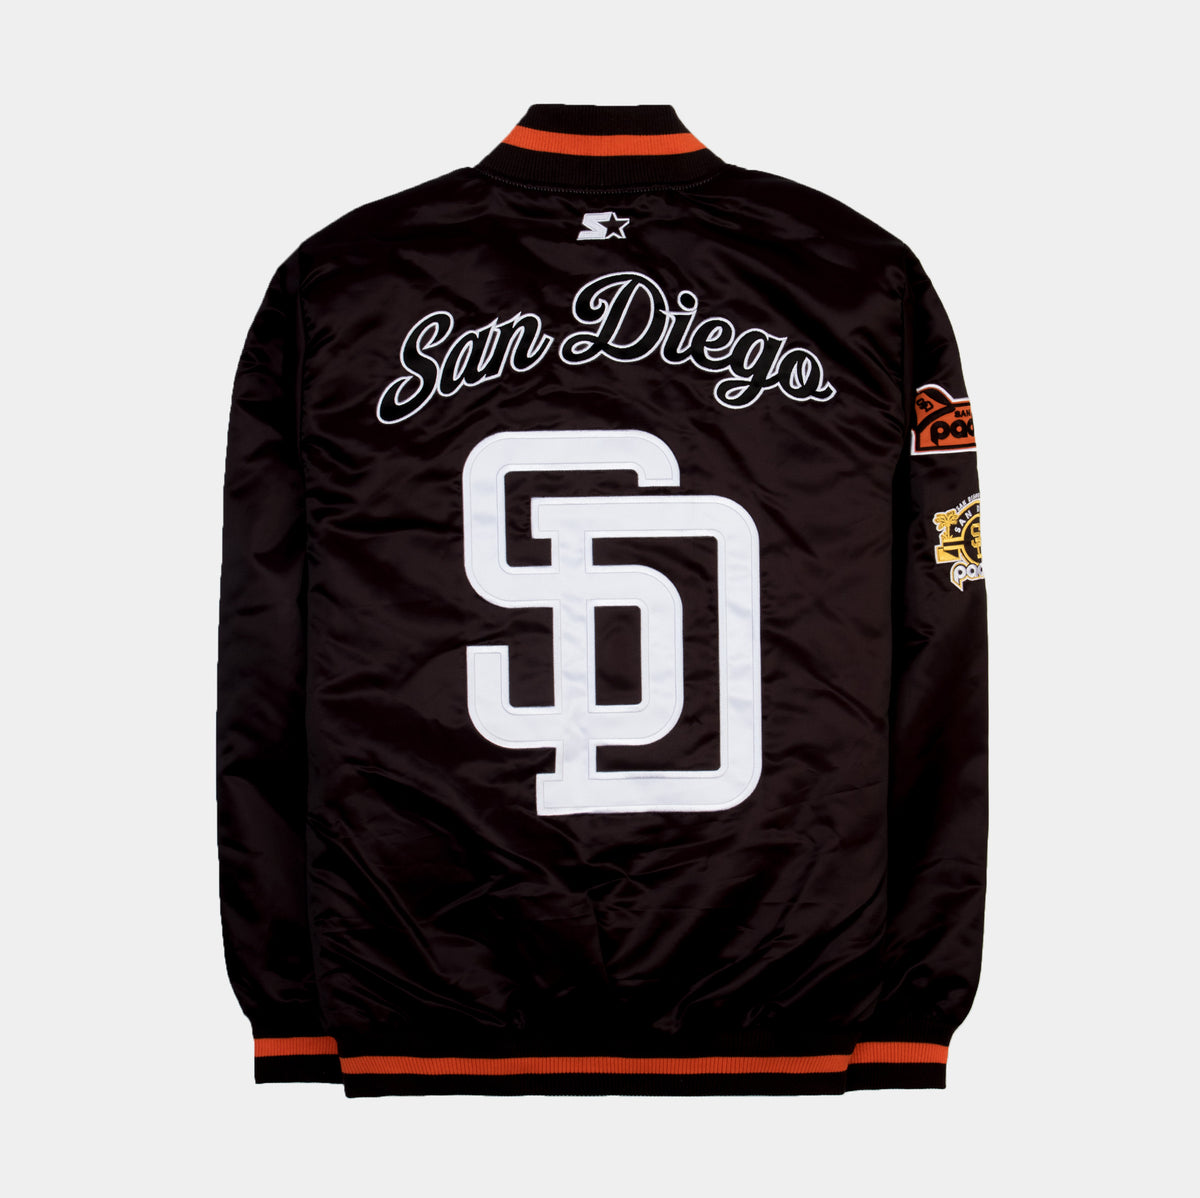 San Diego Padres Bomber Brown and White Jacket